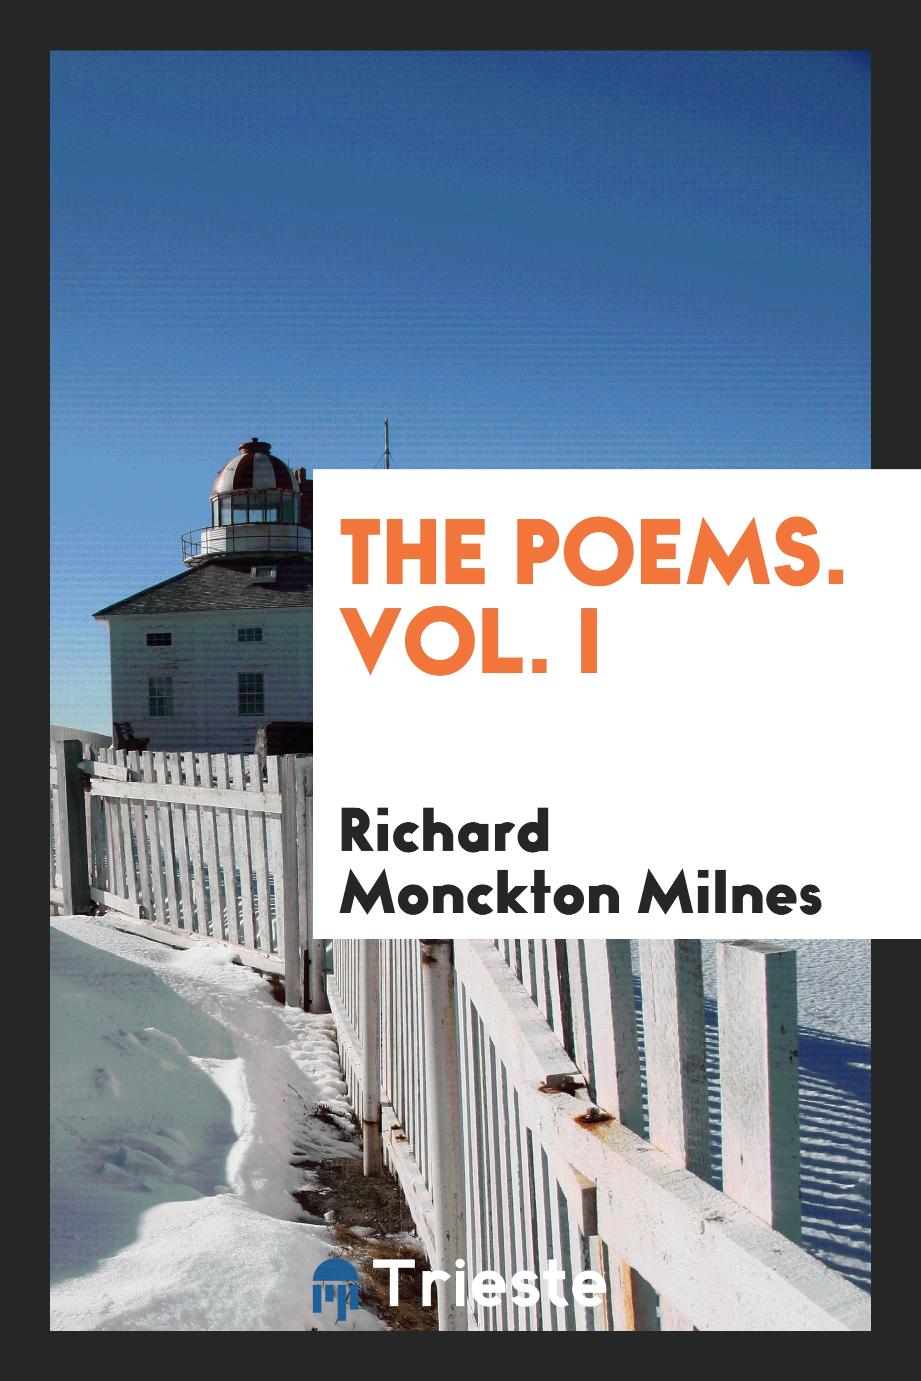 The Poems. Vol. I